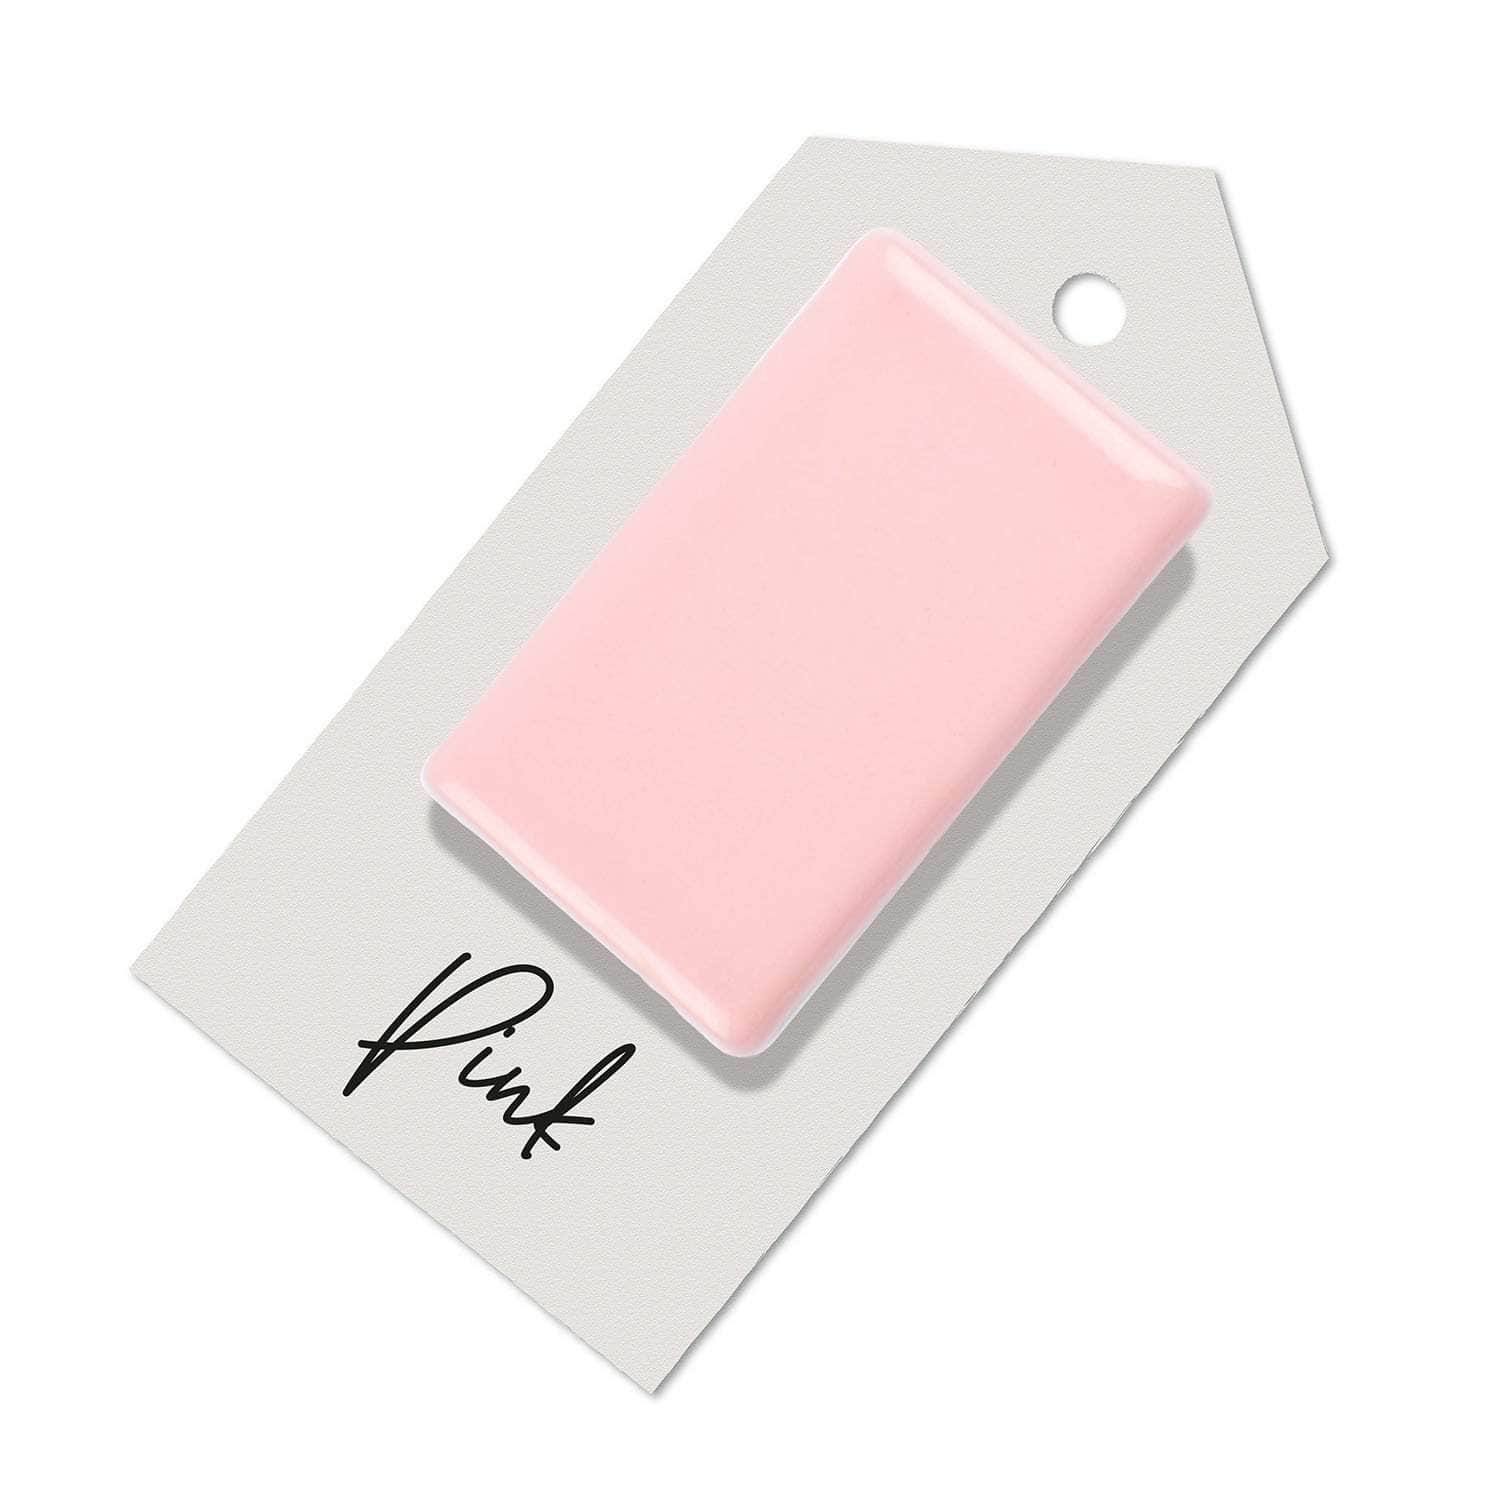 Pink sample for Aga range cooker re-enamelling & reconditioned cookers